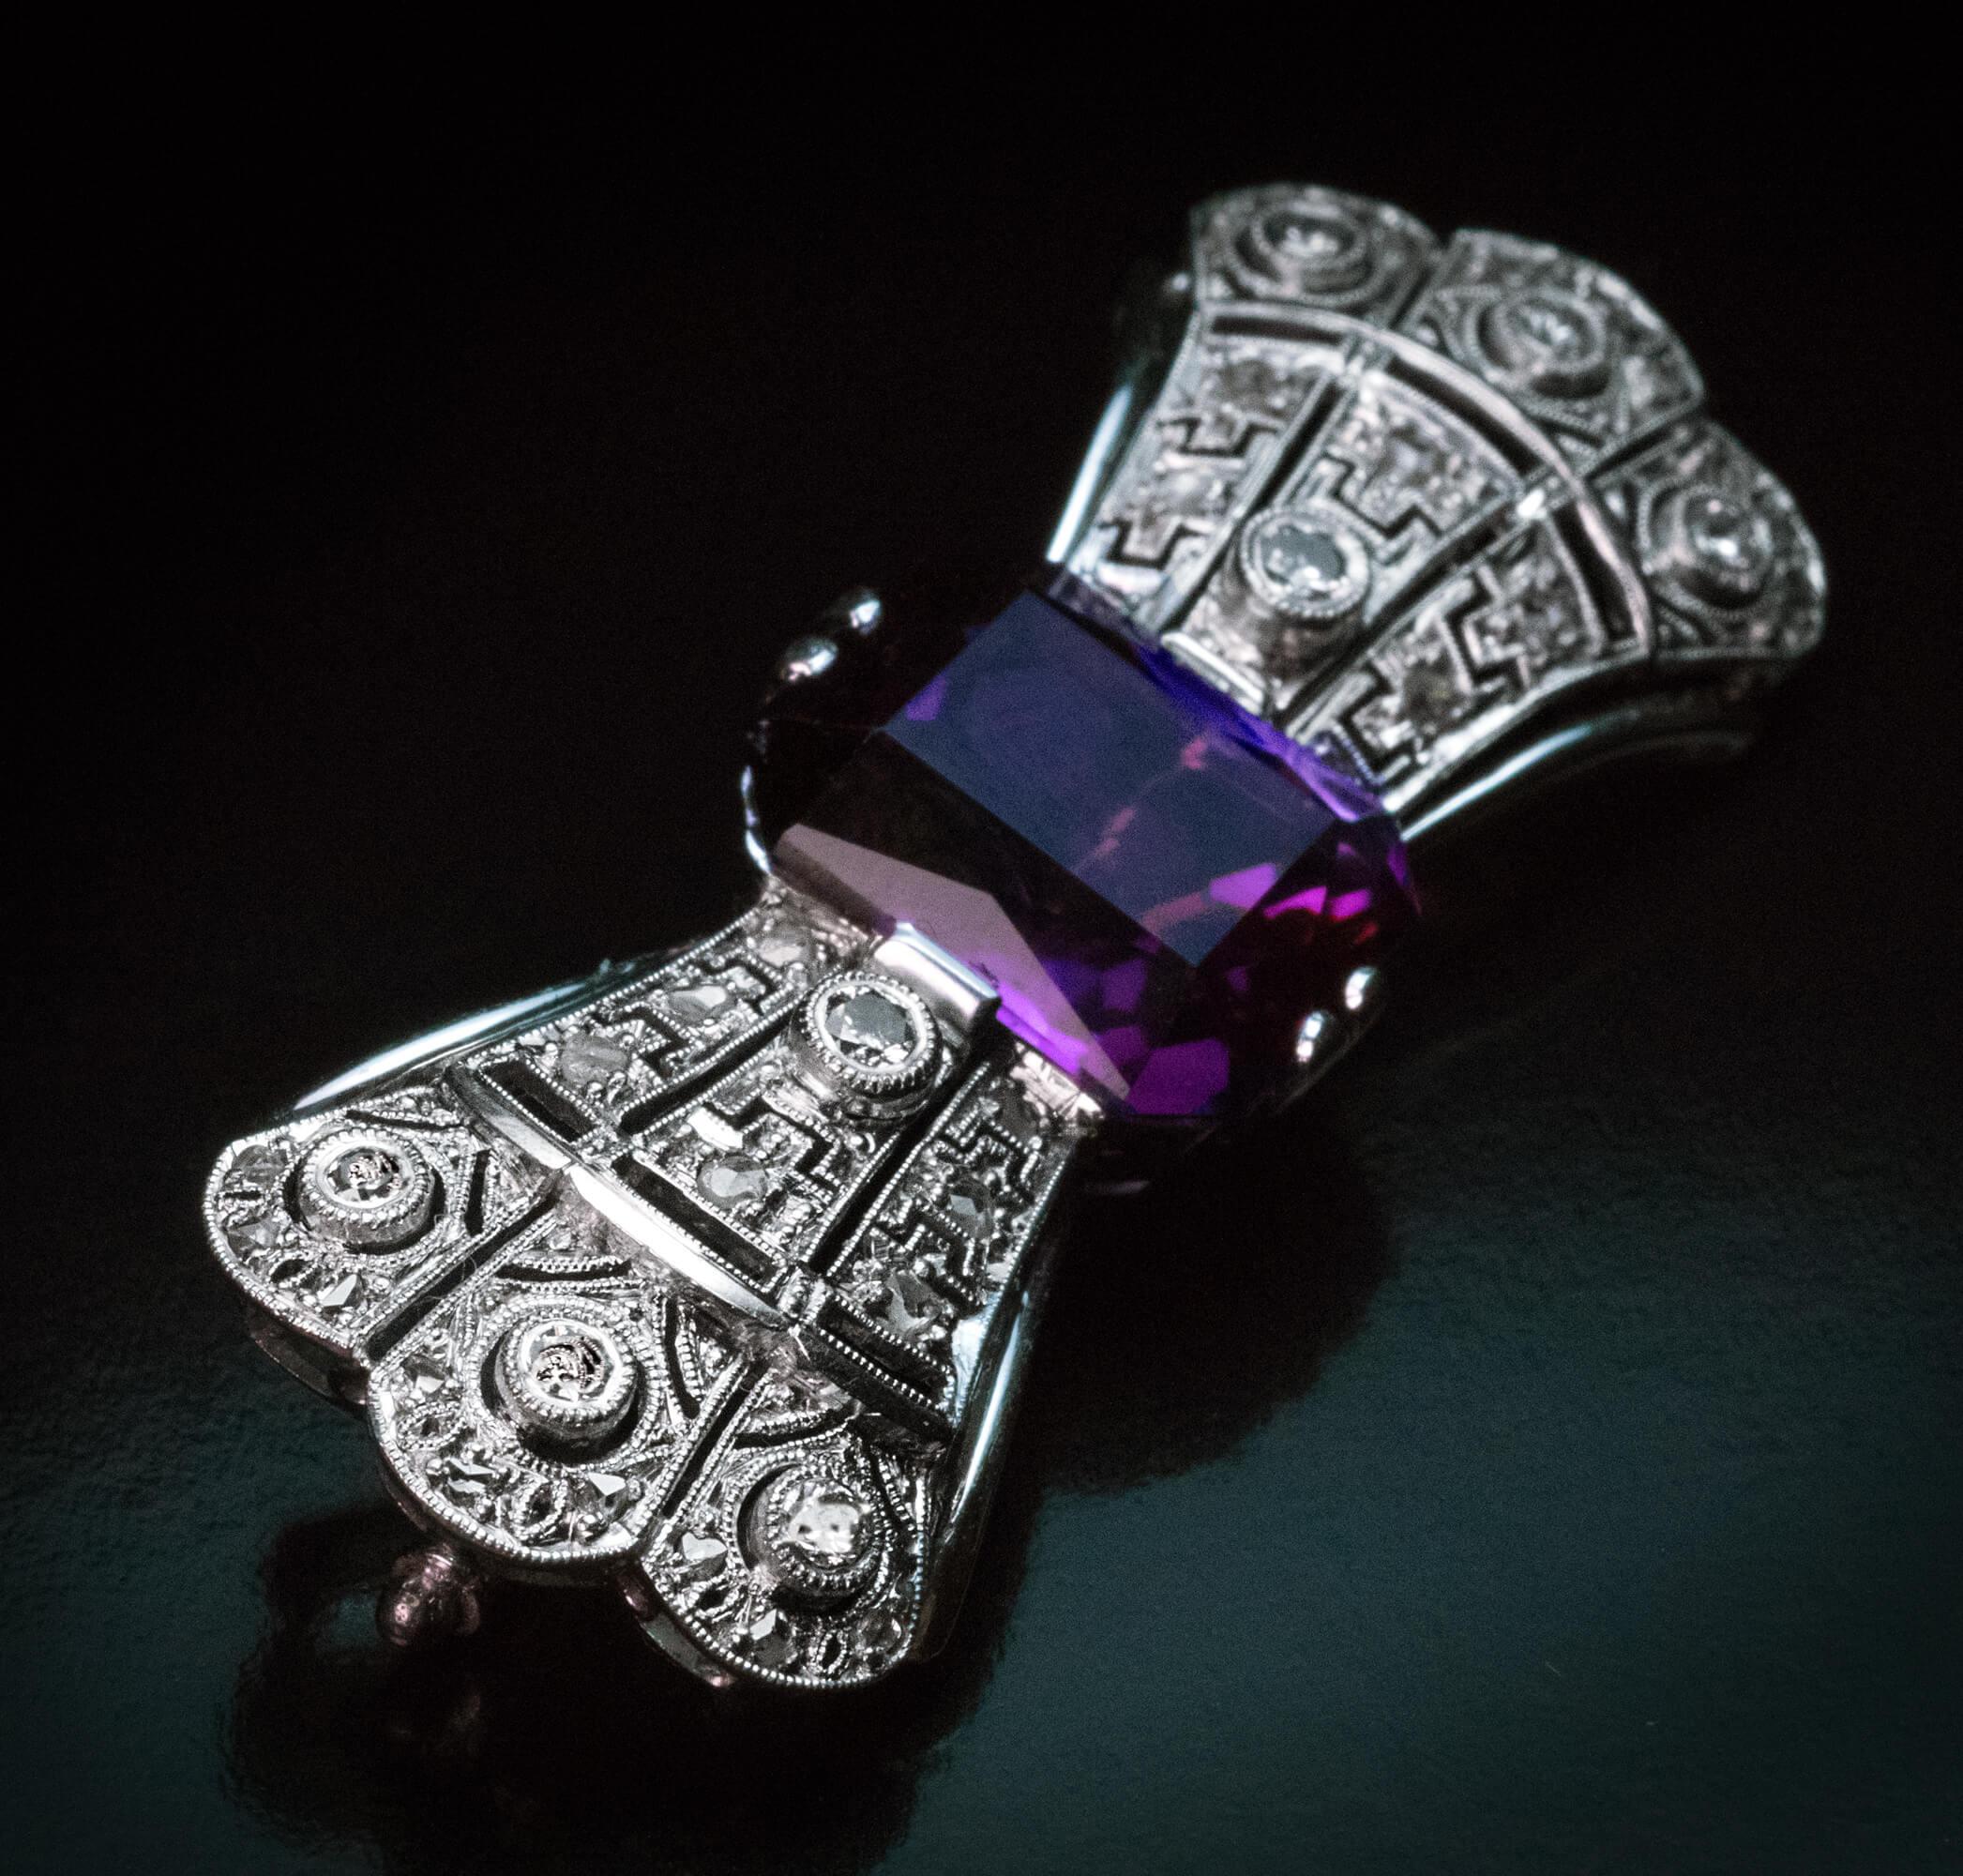 Central Europe, circa 1925  The bow shaped brooch is handcrafted in 14K white gold and centered with an octagon mixed cut amethyst (13.68 x 11.16 x 7.19 mm, approximately 7.27 carats) of a deep purple color with some flashes of pink. The openwork